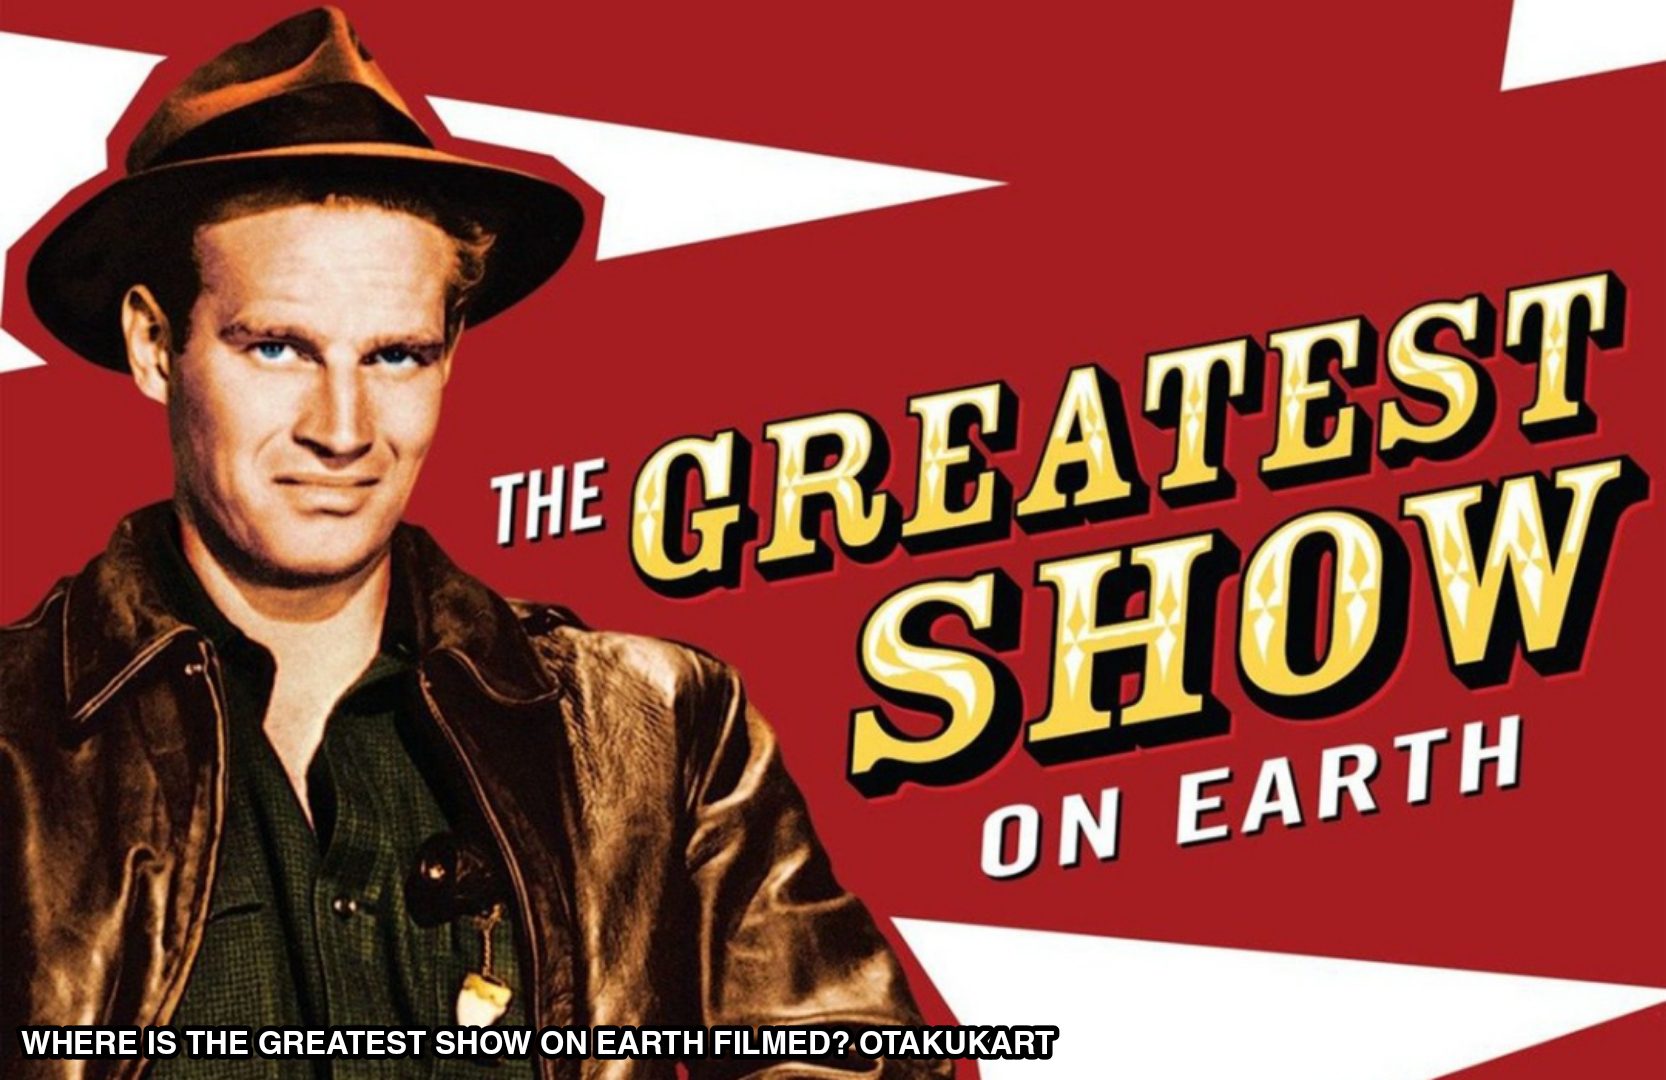 Where Is The Greatest Show On Earth Filmed?